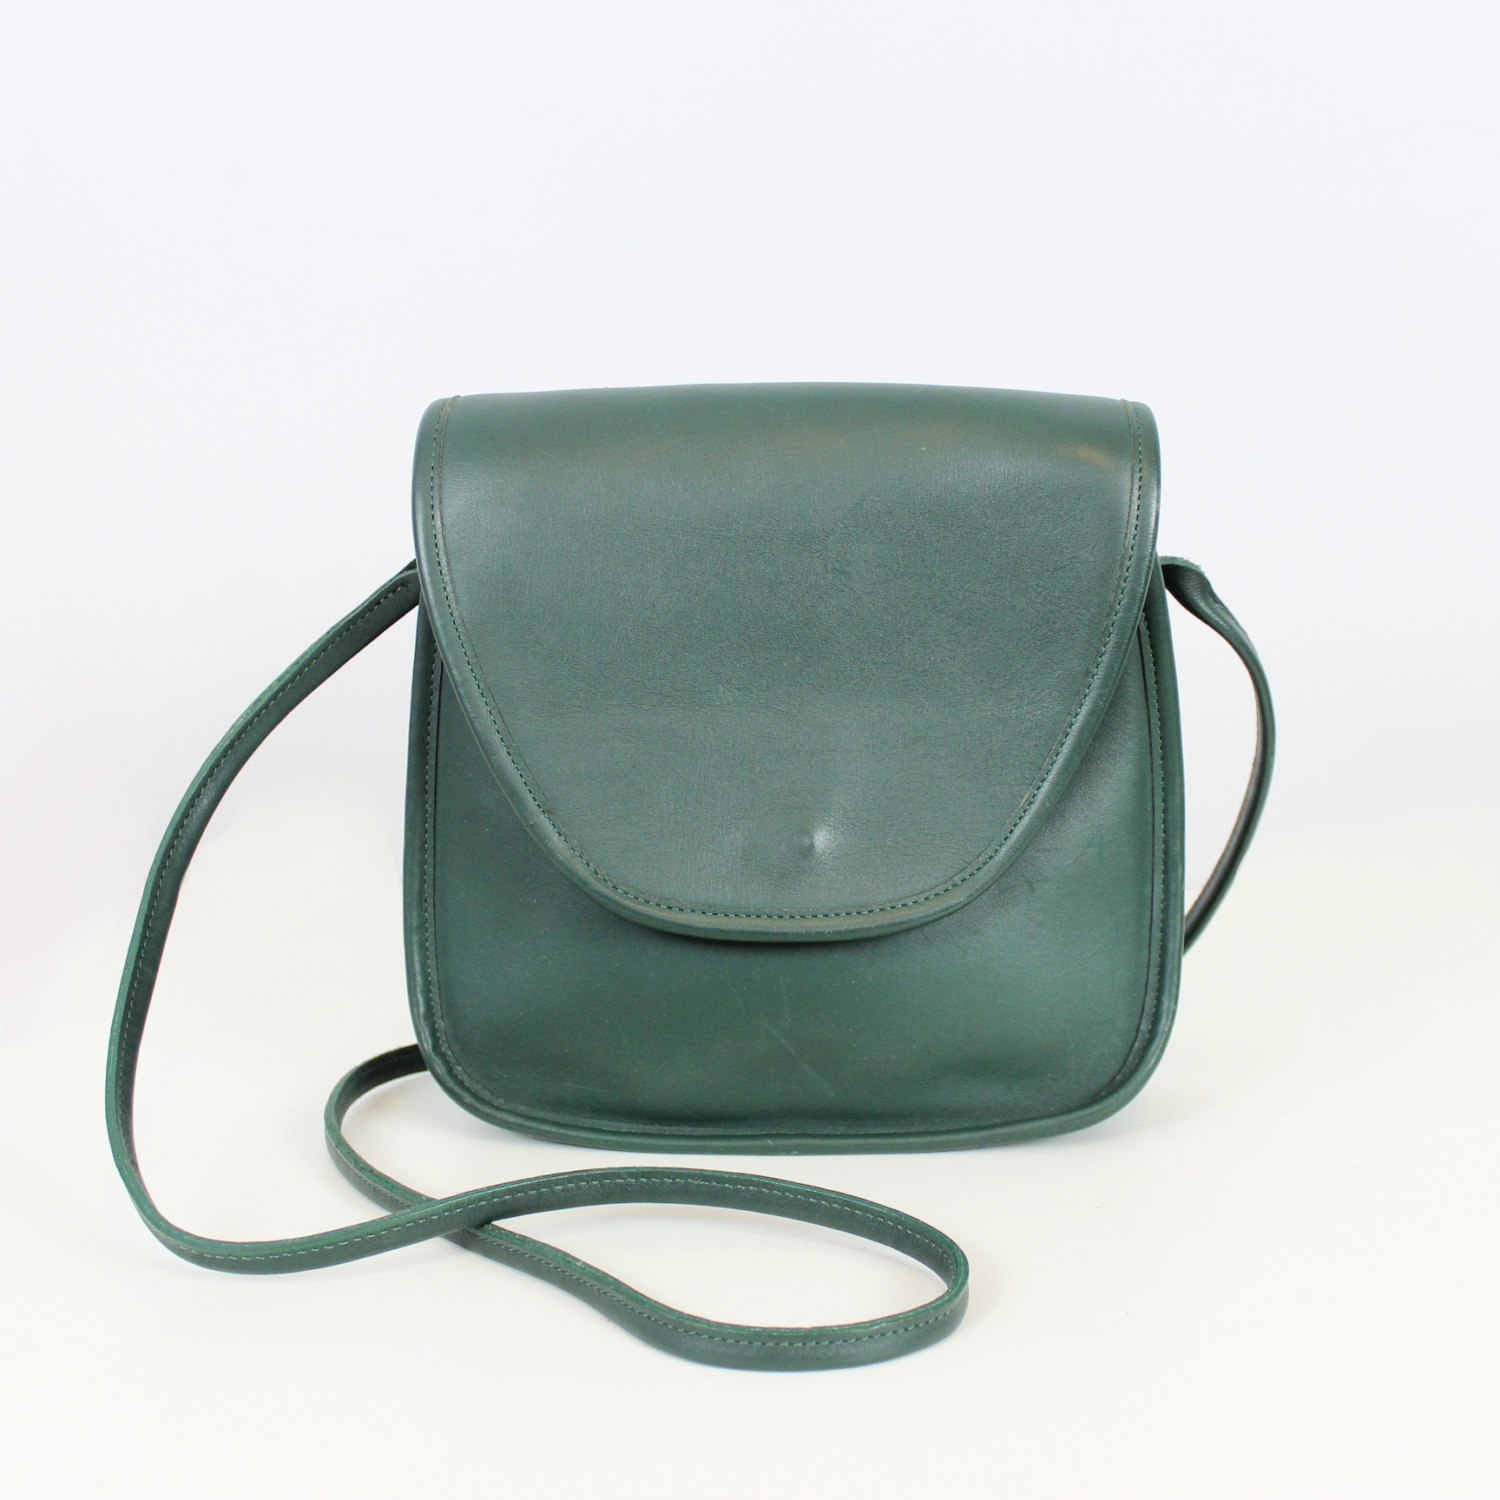 Green Leather Coach Bag. Coach Womens F58846 Crossgrain Leather City